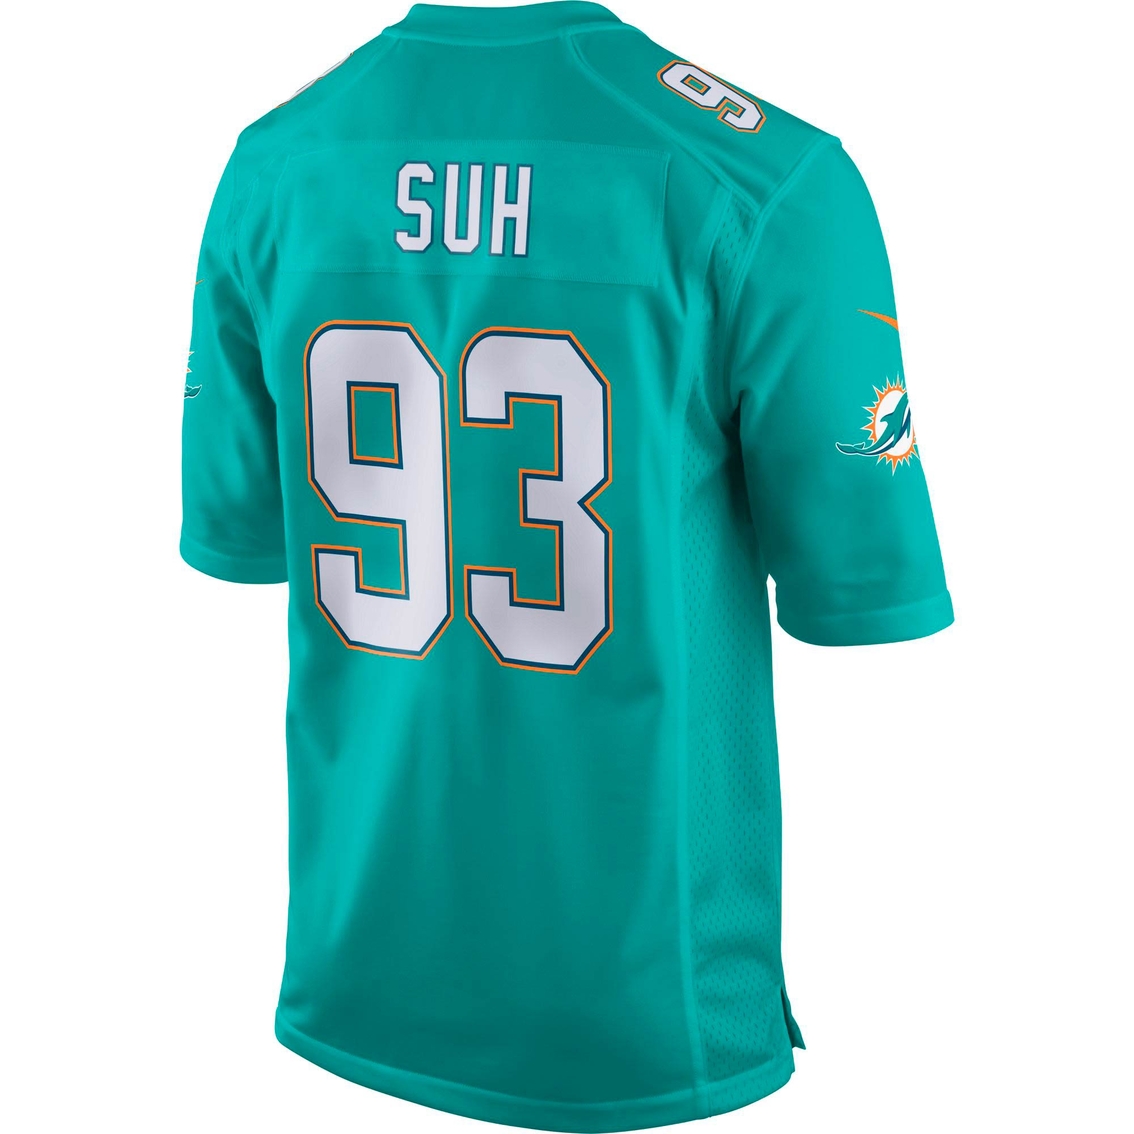 Nike NFL Miami Dolphins Suh Game Jersey - Image 2 of 2